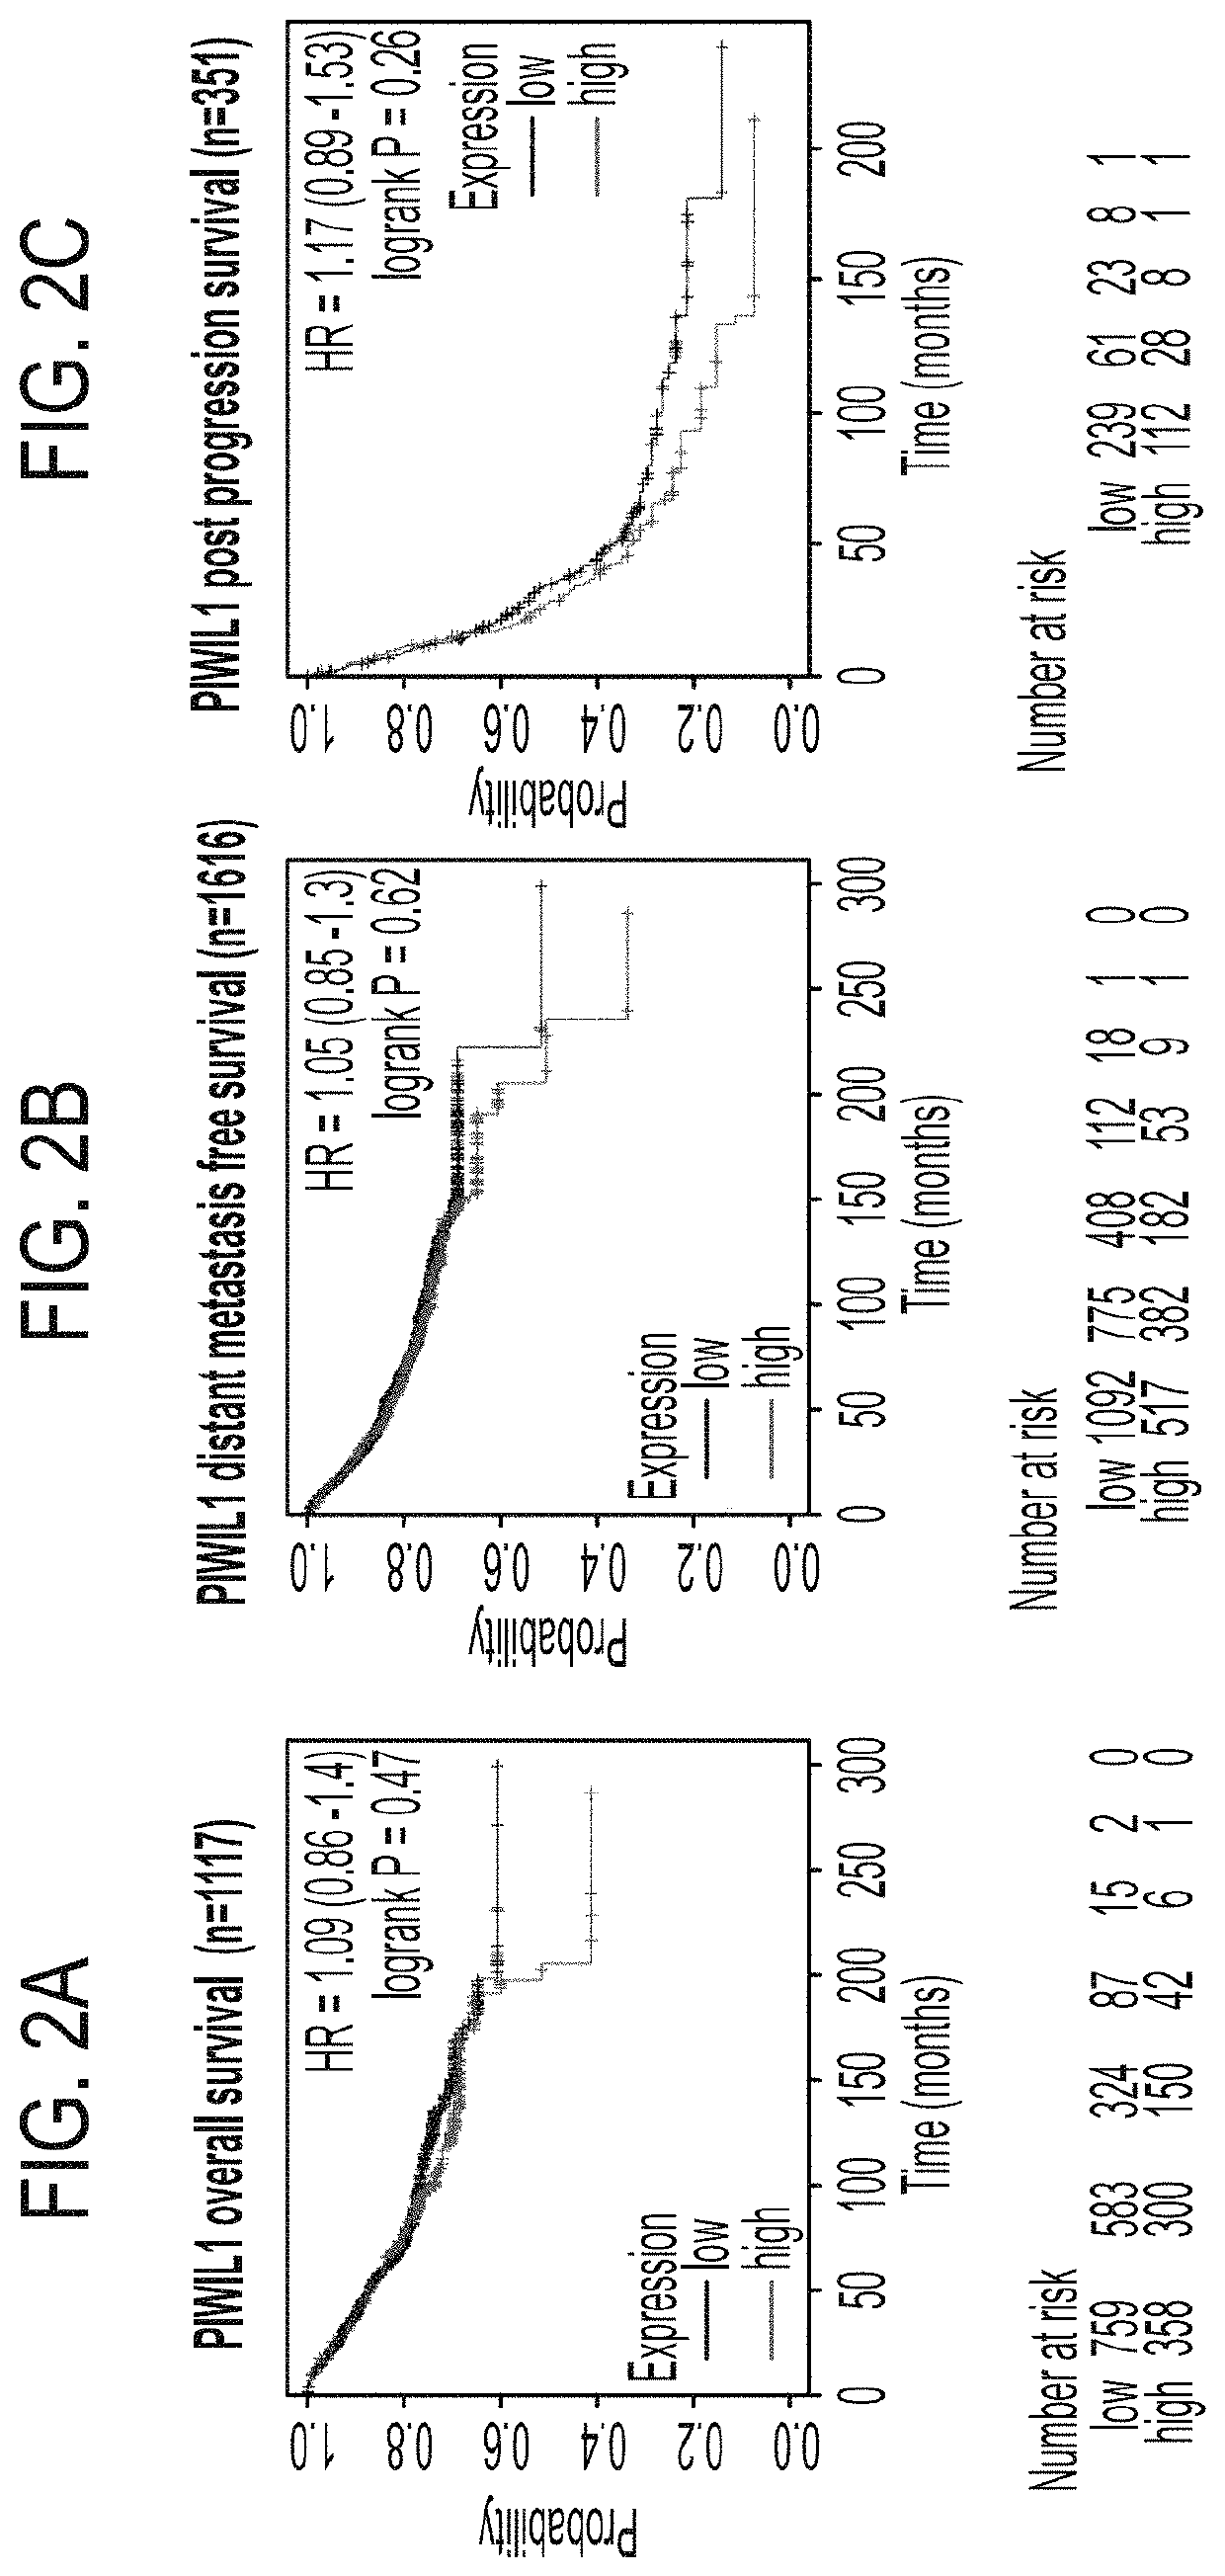 Compositions and methods for treating cancer by inhibiting PIWIL4